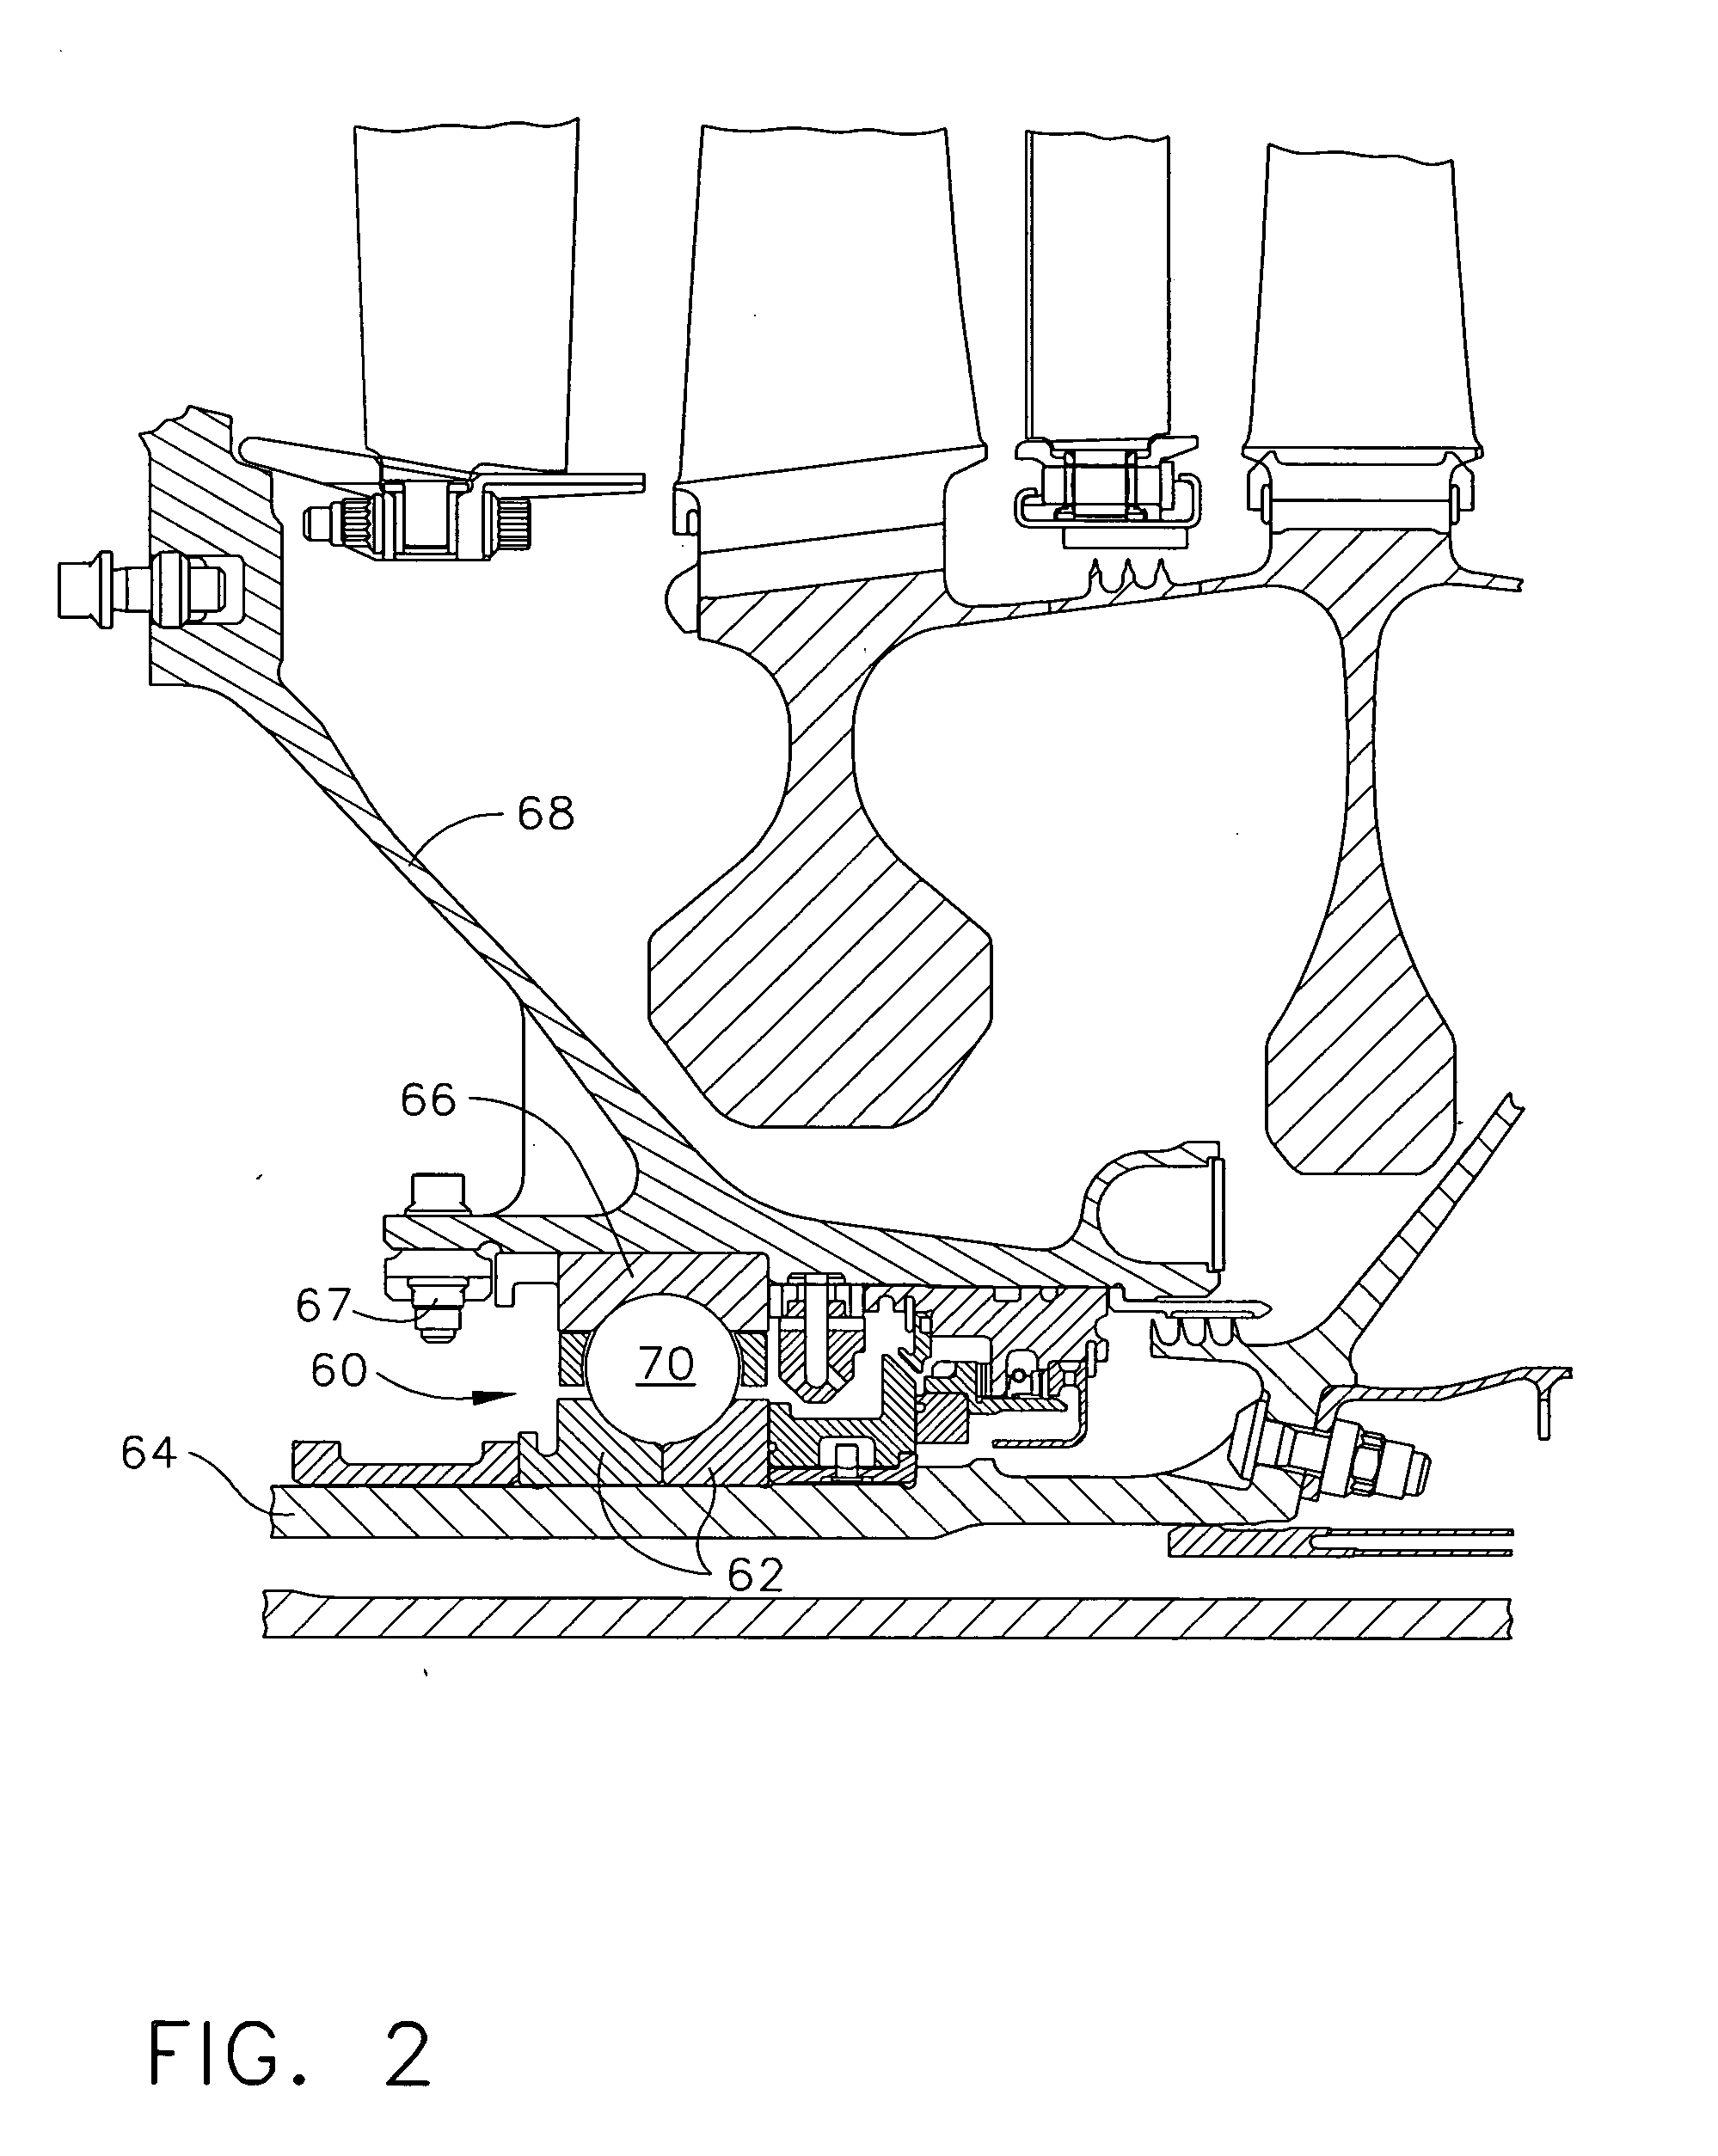 Methods and apparatus for assembling a bearing assembly